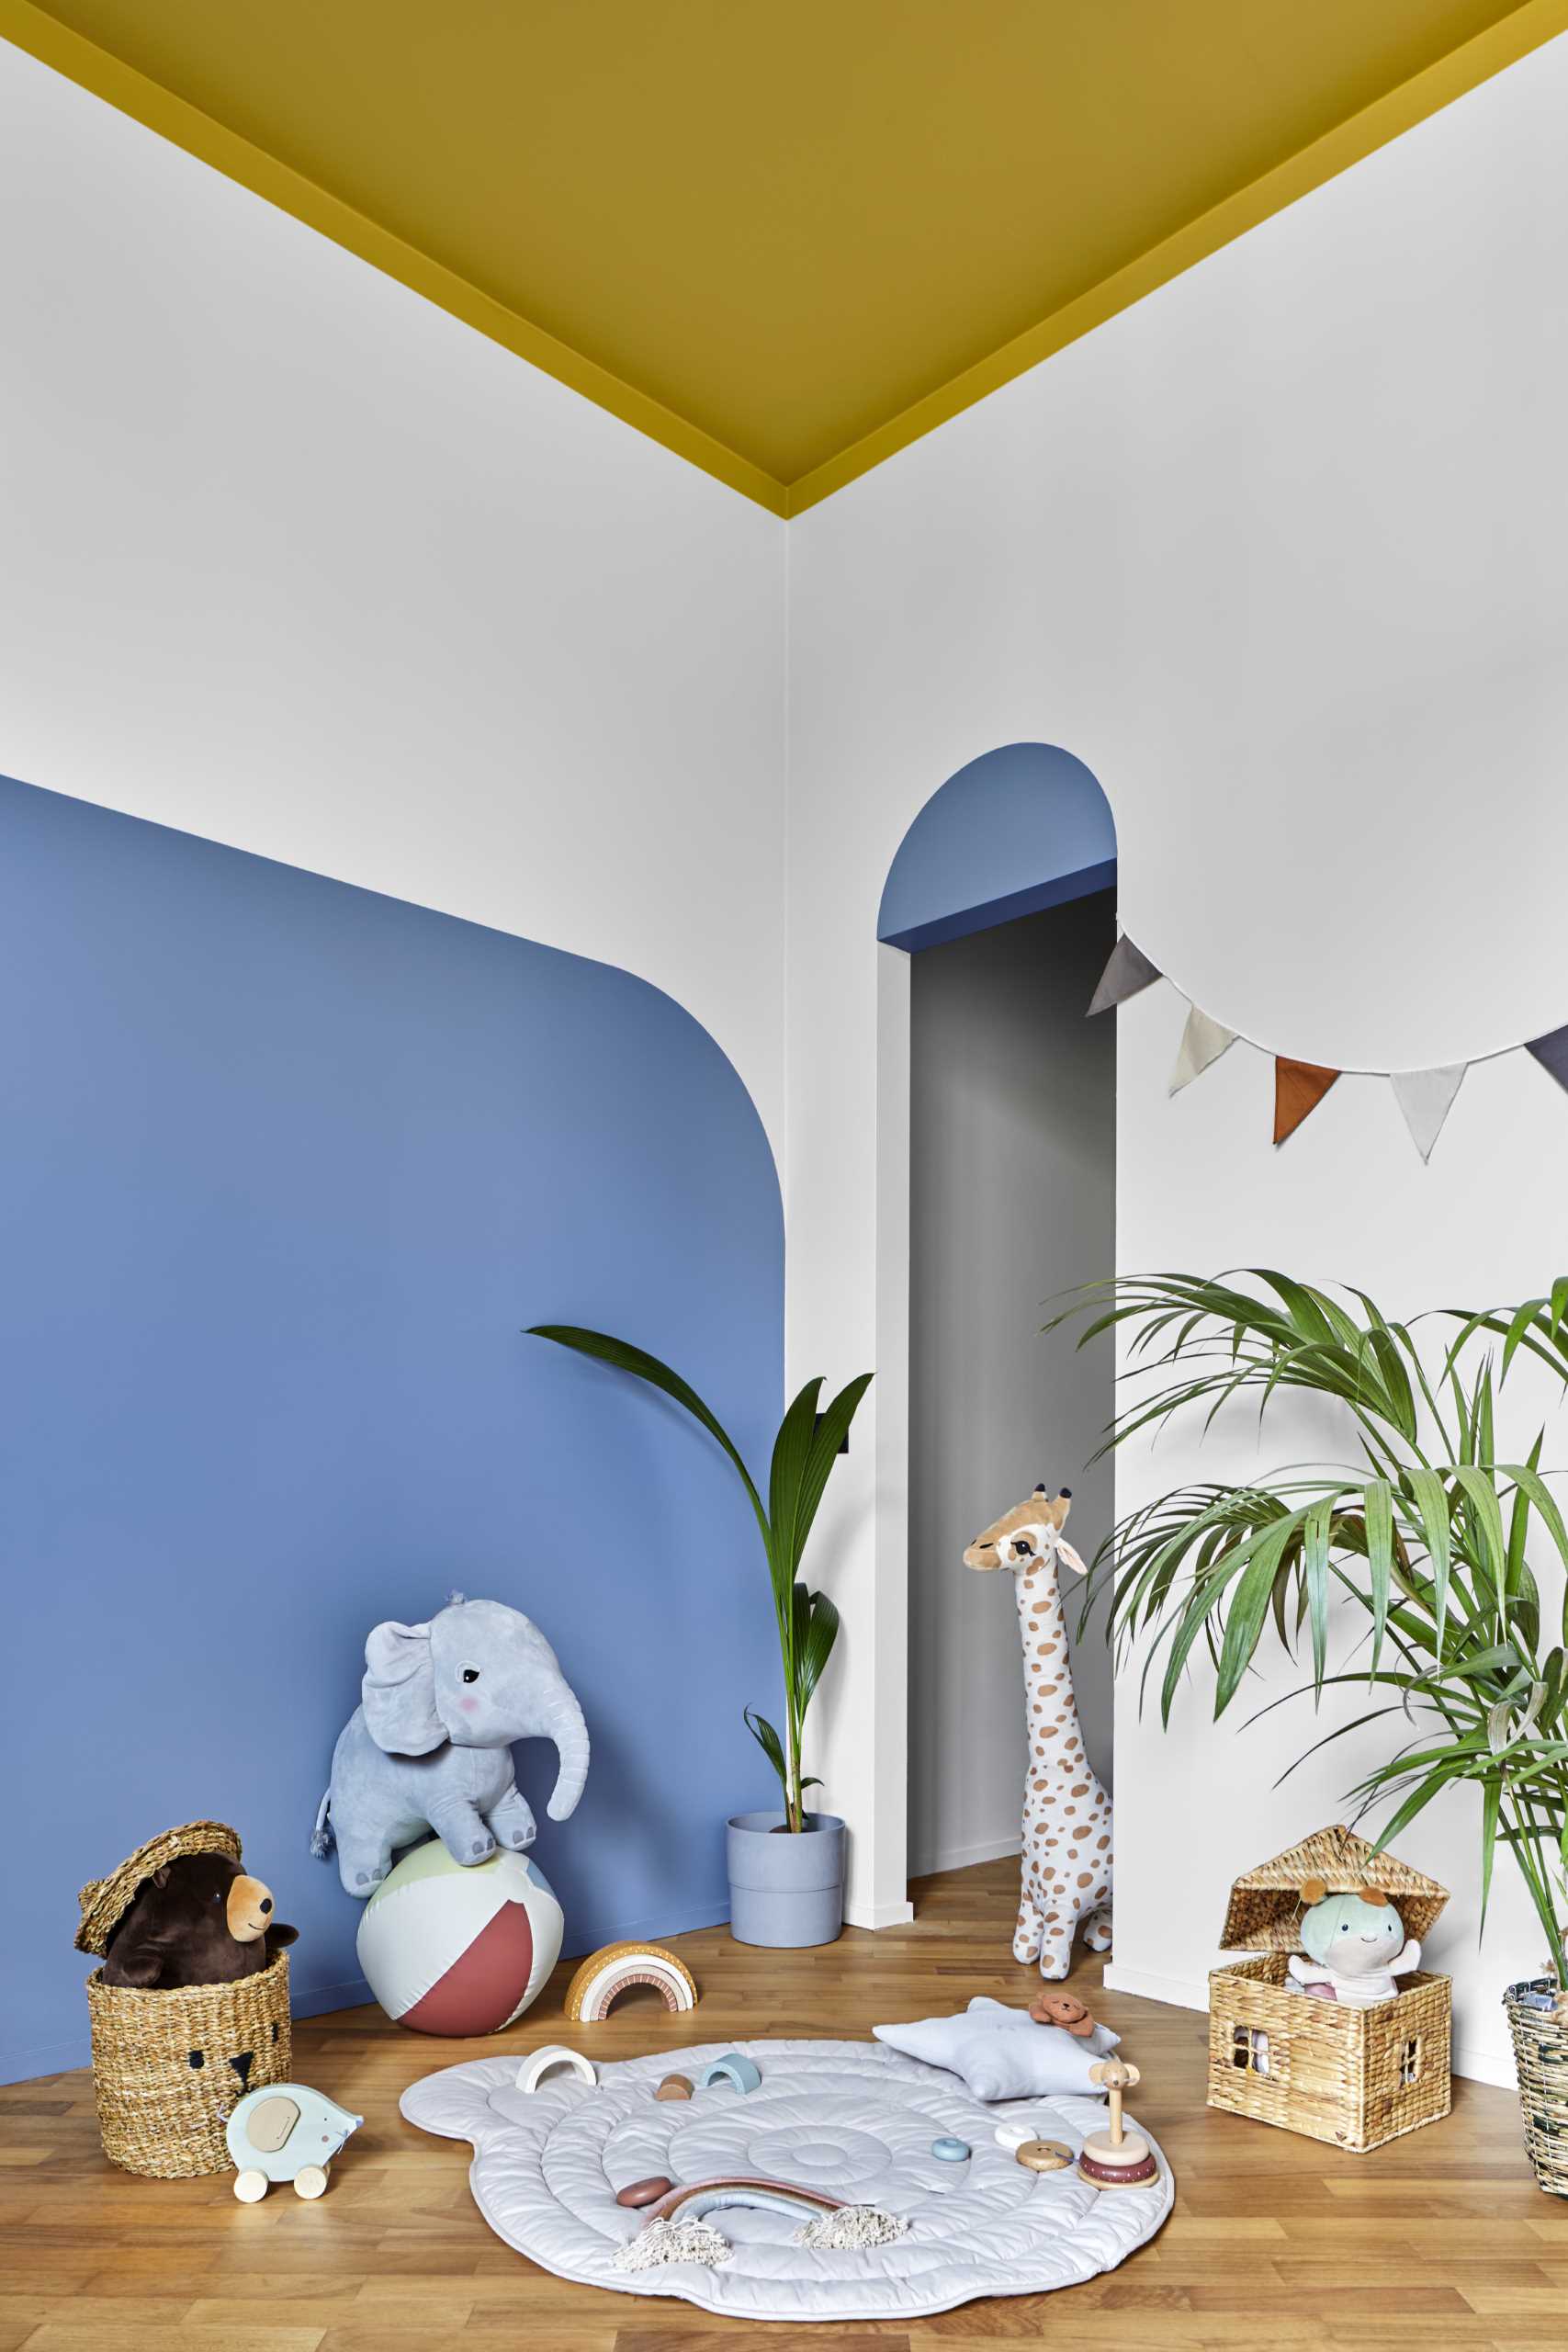 Ocher yellow descends slightly from the ceiling to the walls to convey the sense of a safe and protected area in this kid's bedroom.